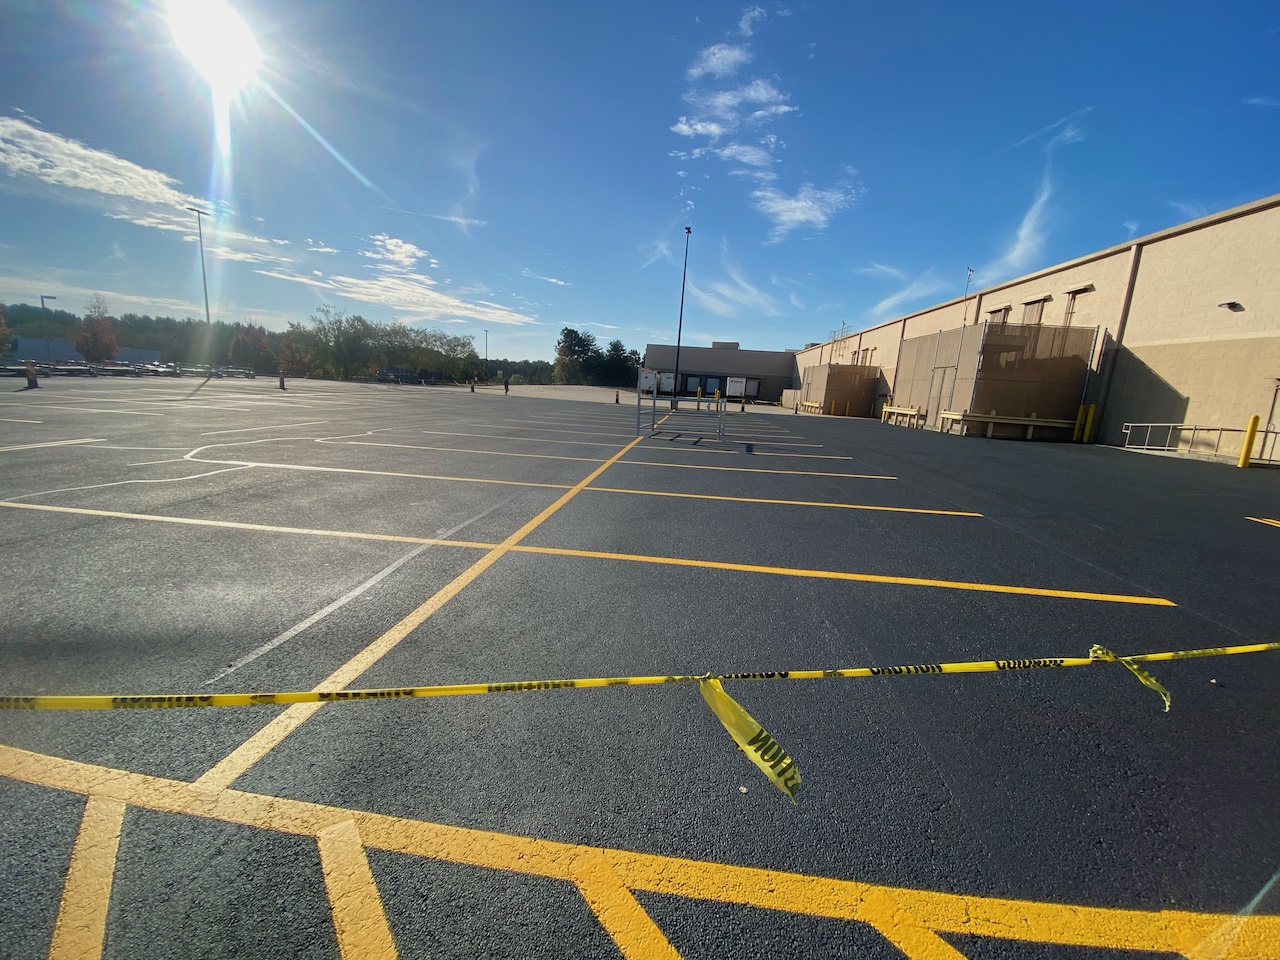 How Do I Plan And Budget For Future Parking Lot Maintenance?